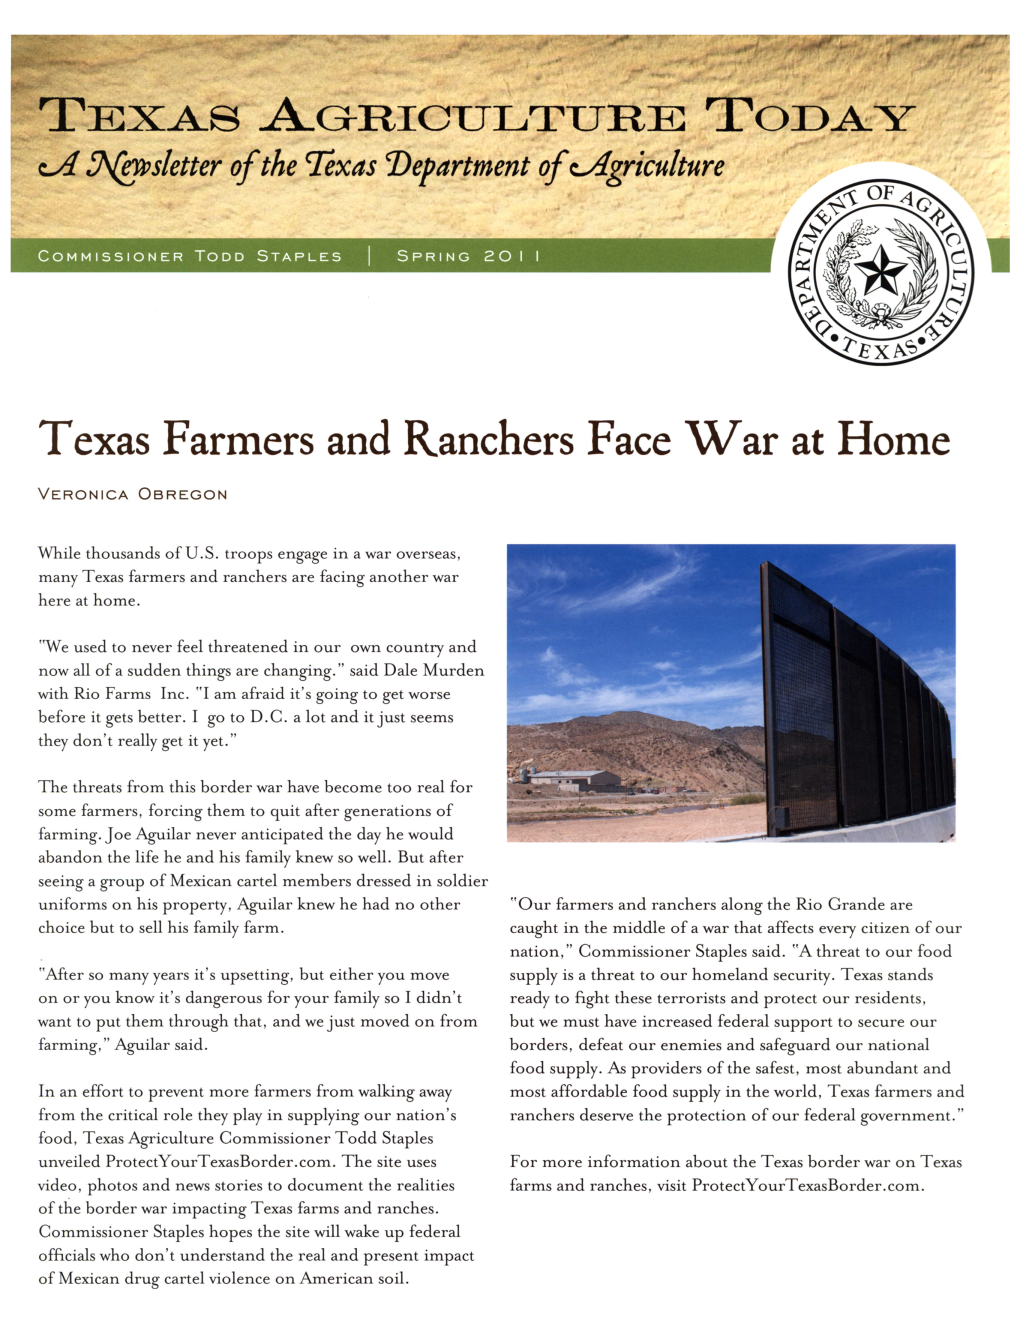 AGRICULTURE TODAY Texas Farmers and Ranchers Face War At